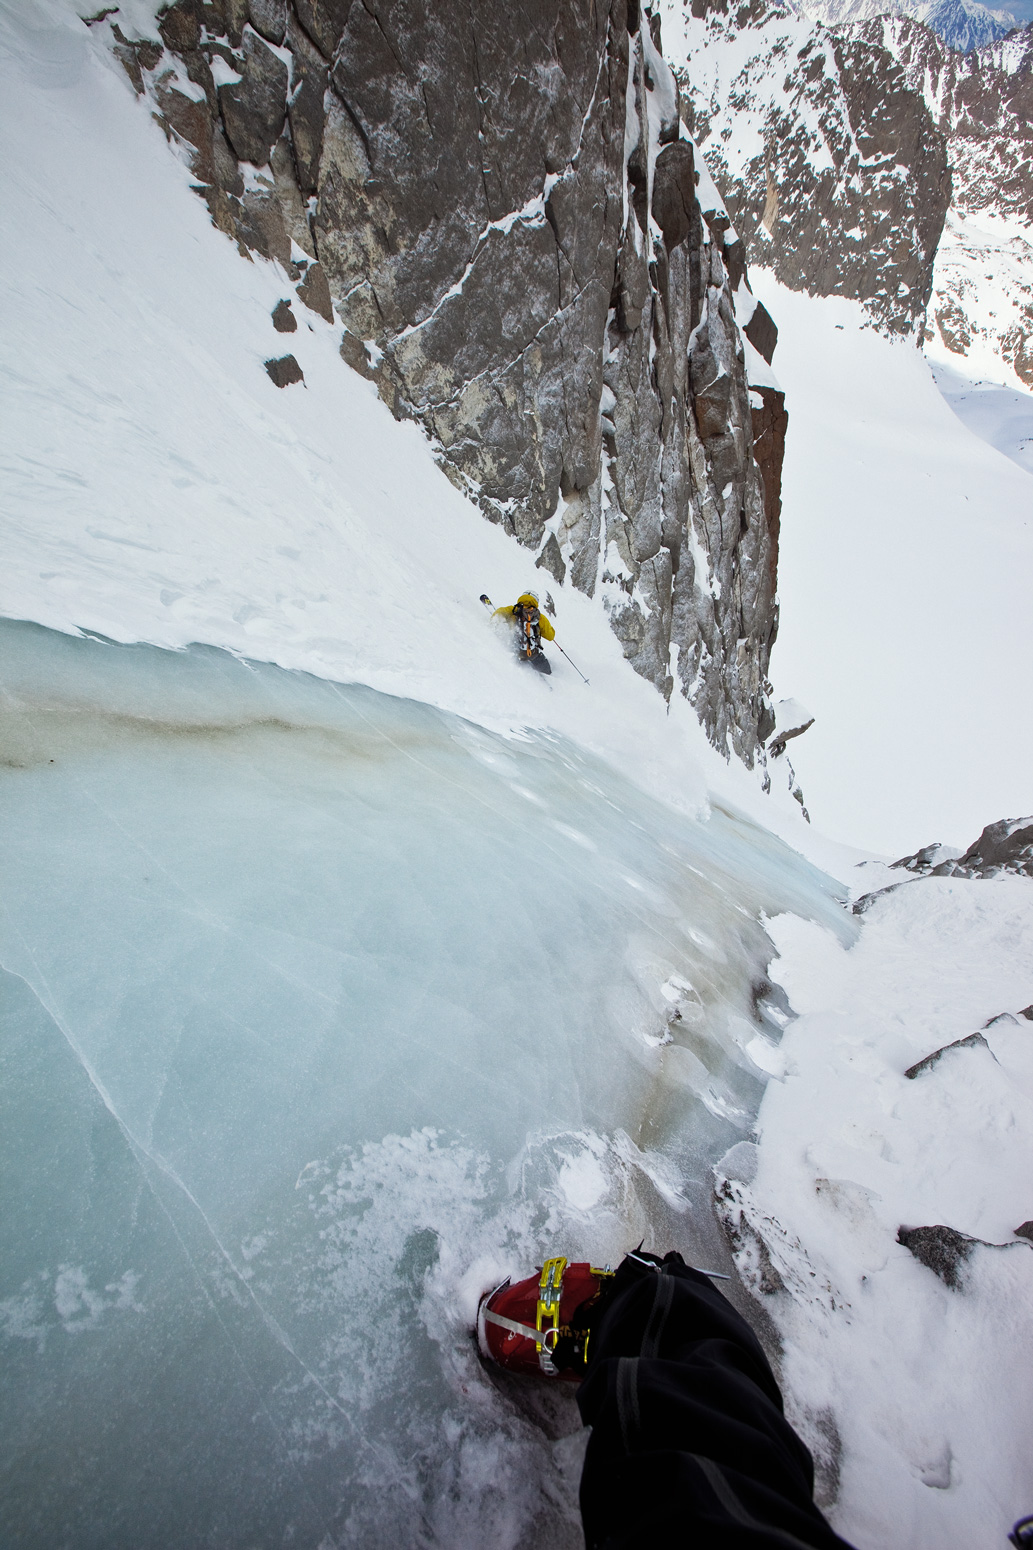 2009 with Ryan Boyer in the Sierra Palisades at 14,000 feet. I had first envisioned skiing next to ice in Chamonix in 2008, but it never materialized. When our friend went up this couloir and sent me a pic of the ice the following winter, I knew this was my chance. Ryan is skiing on telemarks and I’m in some pre-AT conversion with minimal walk mode. The foot was not part of the original vision, but happened to lend some perspective. 